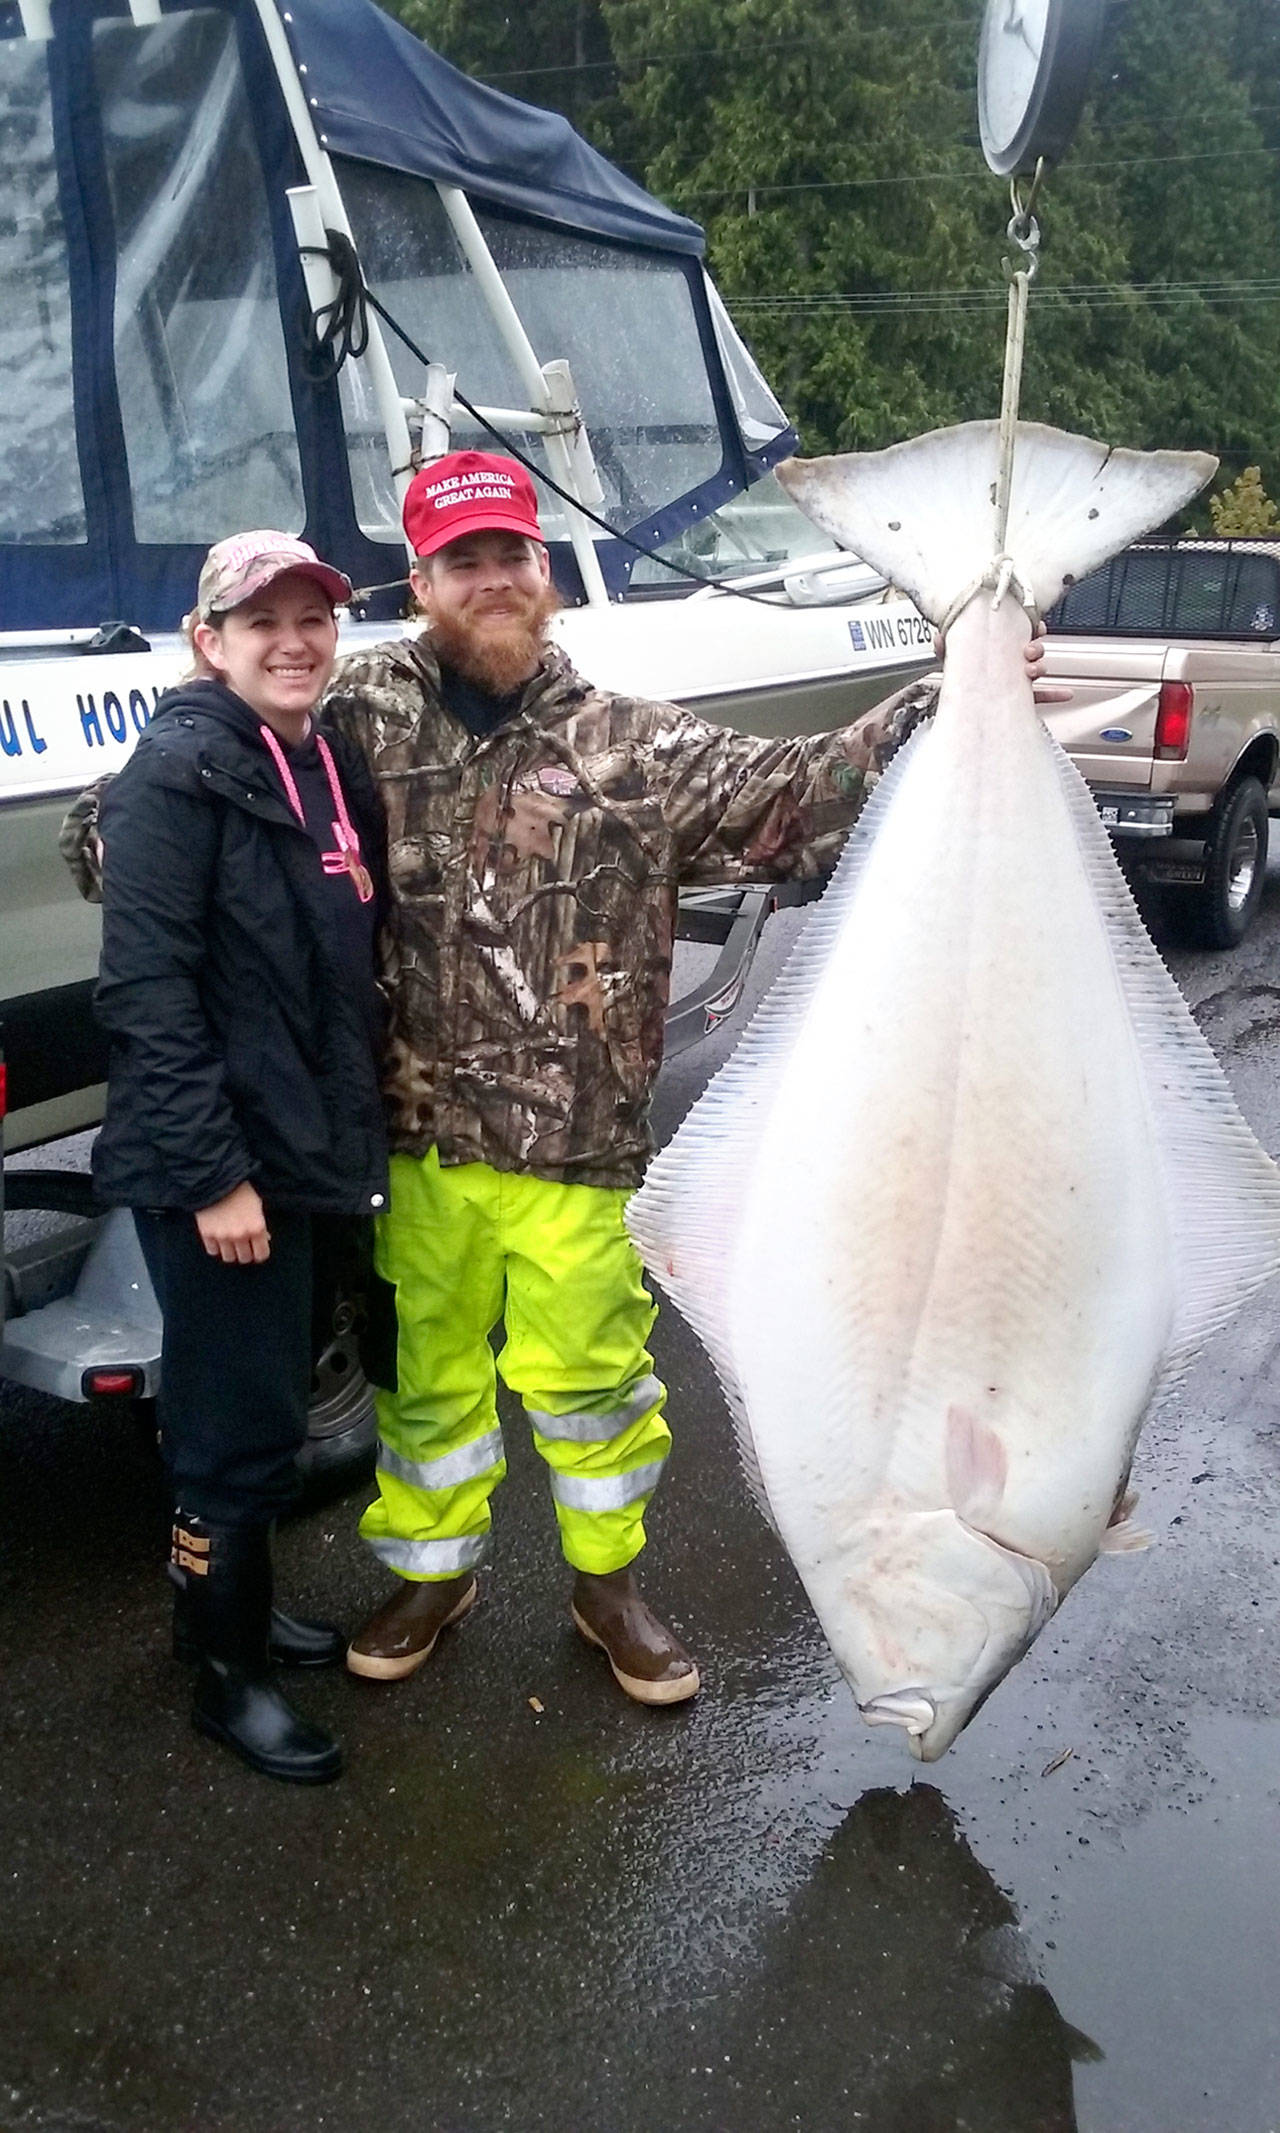 Port Angeles’ Bobby Harrison and Leanne Price caught this 155-pound halibut in 80 feet of water on the third day of halibut fishing last Thursday.